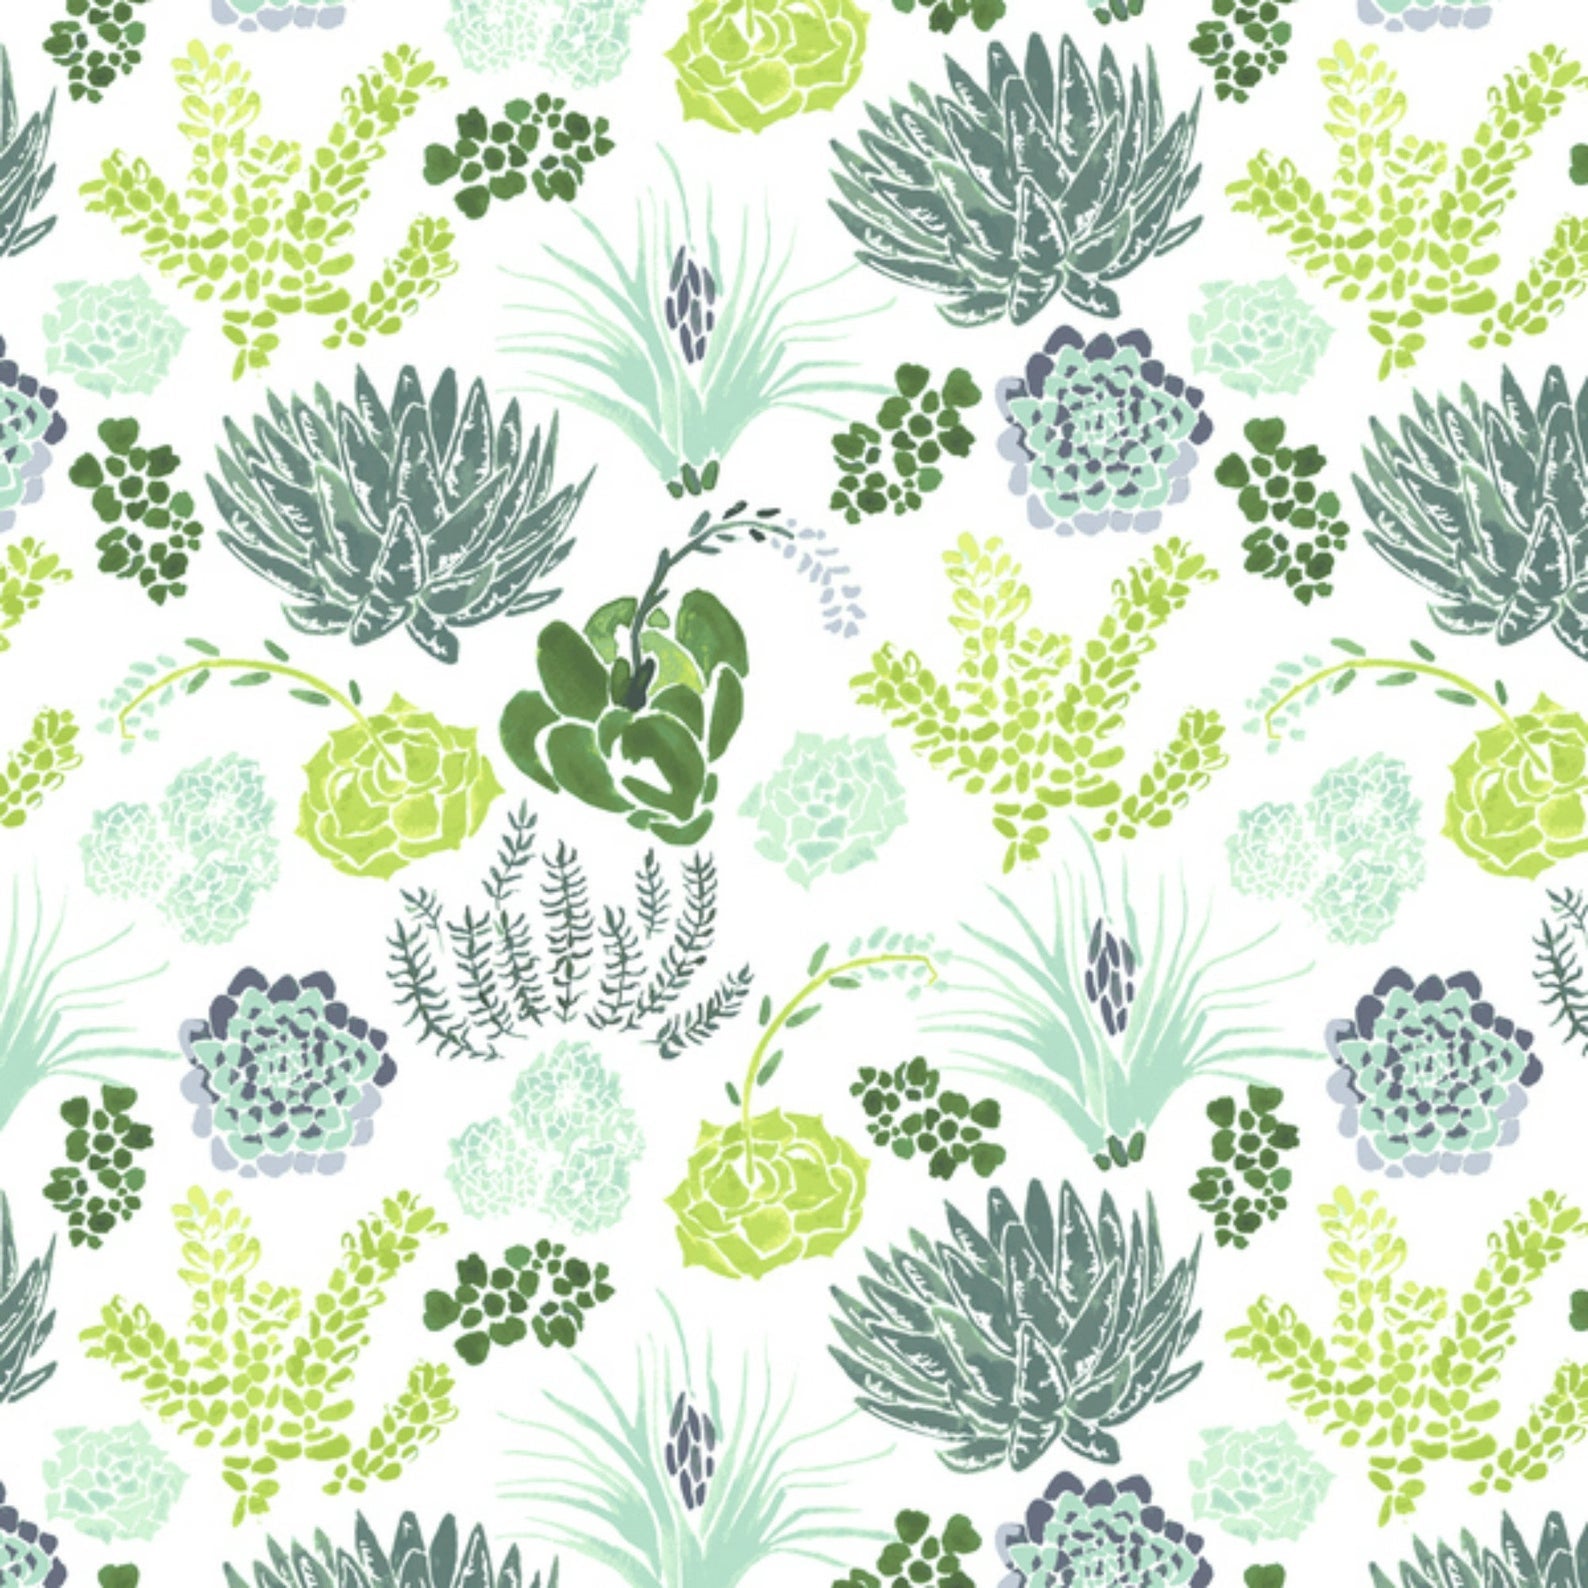 Succulents on White - Weave & Woven